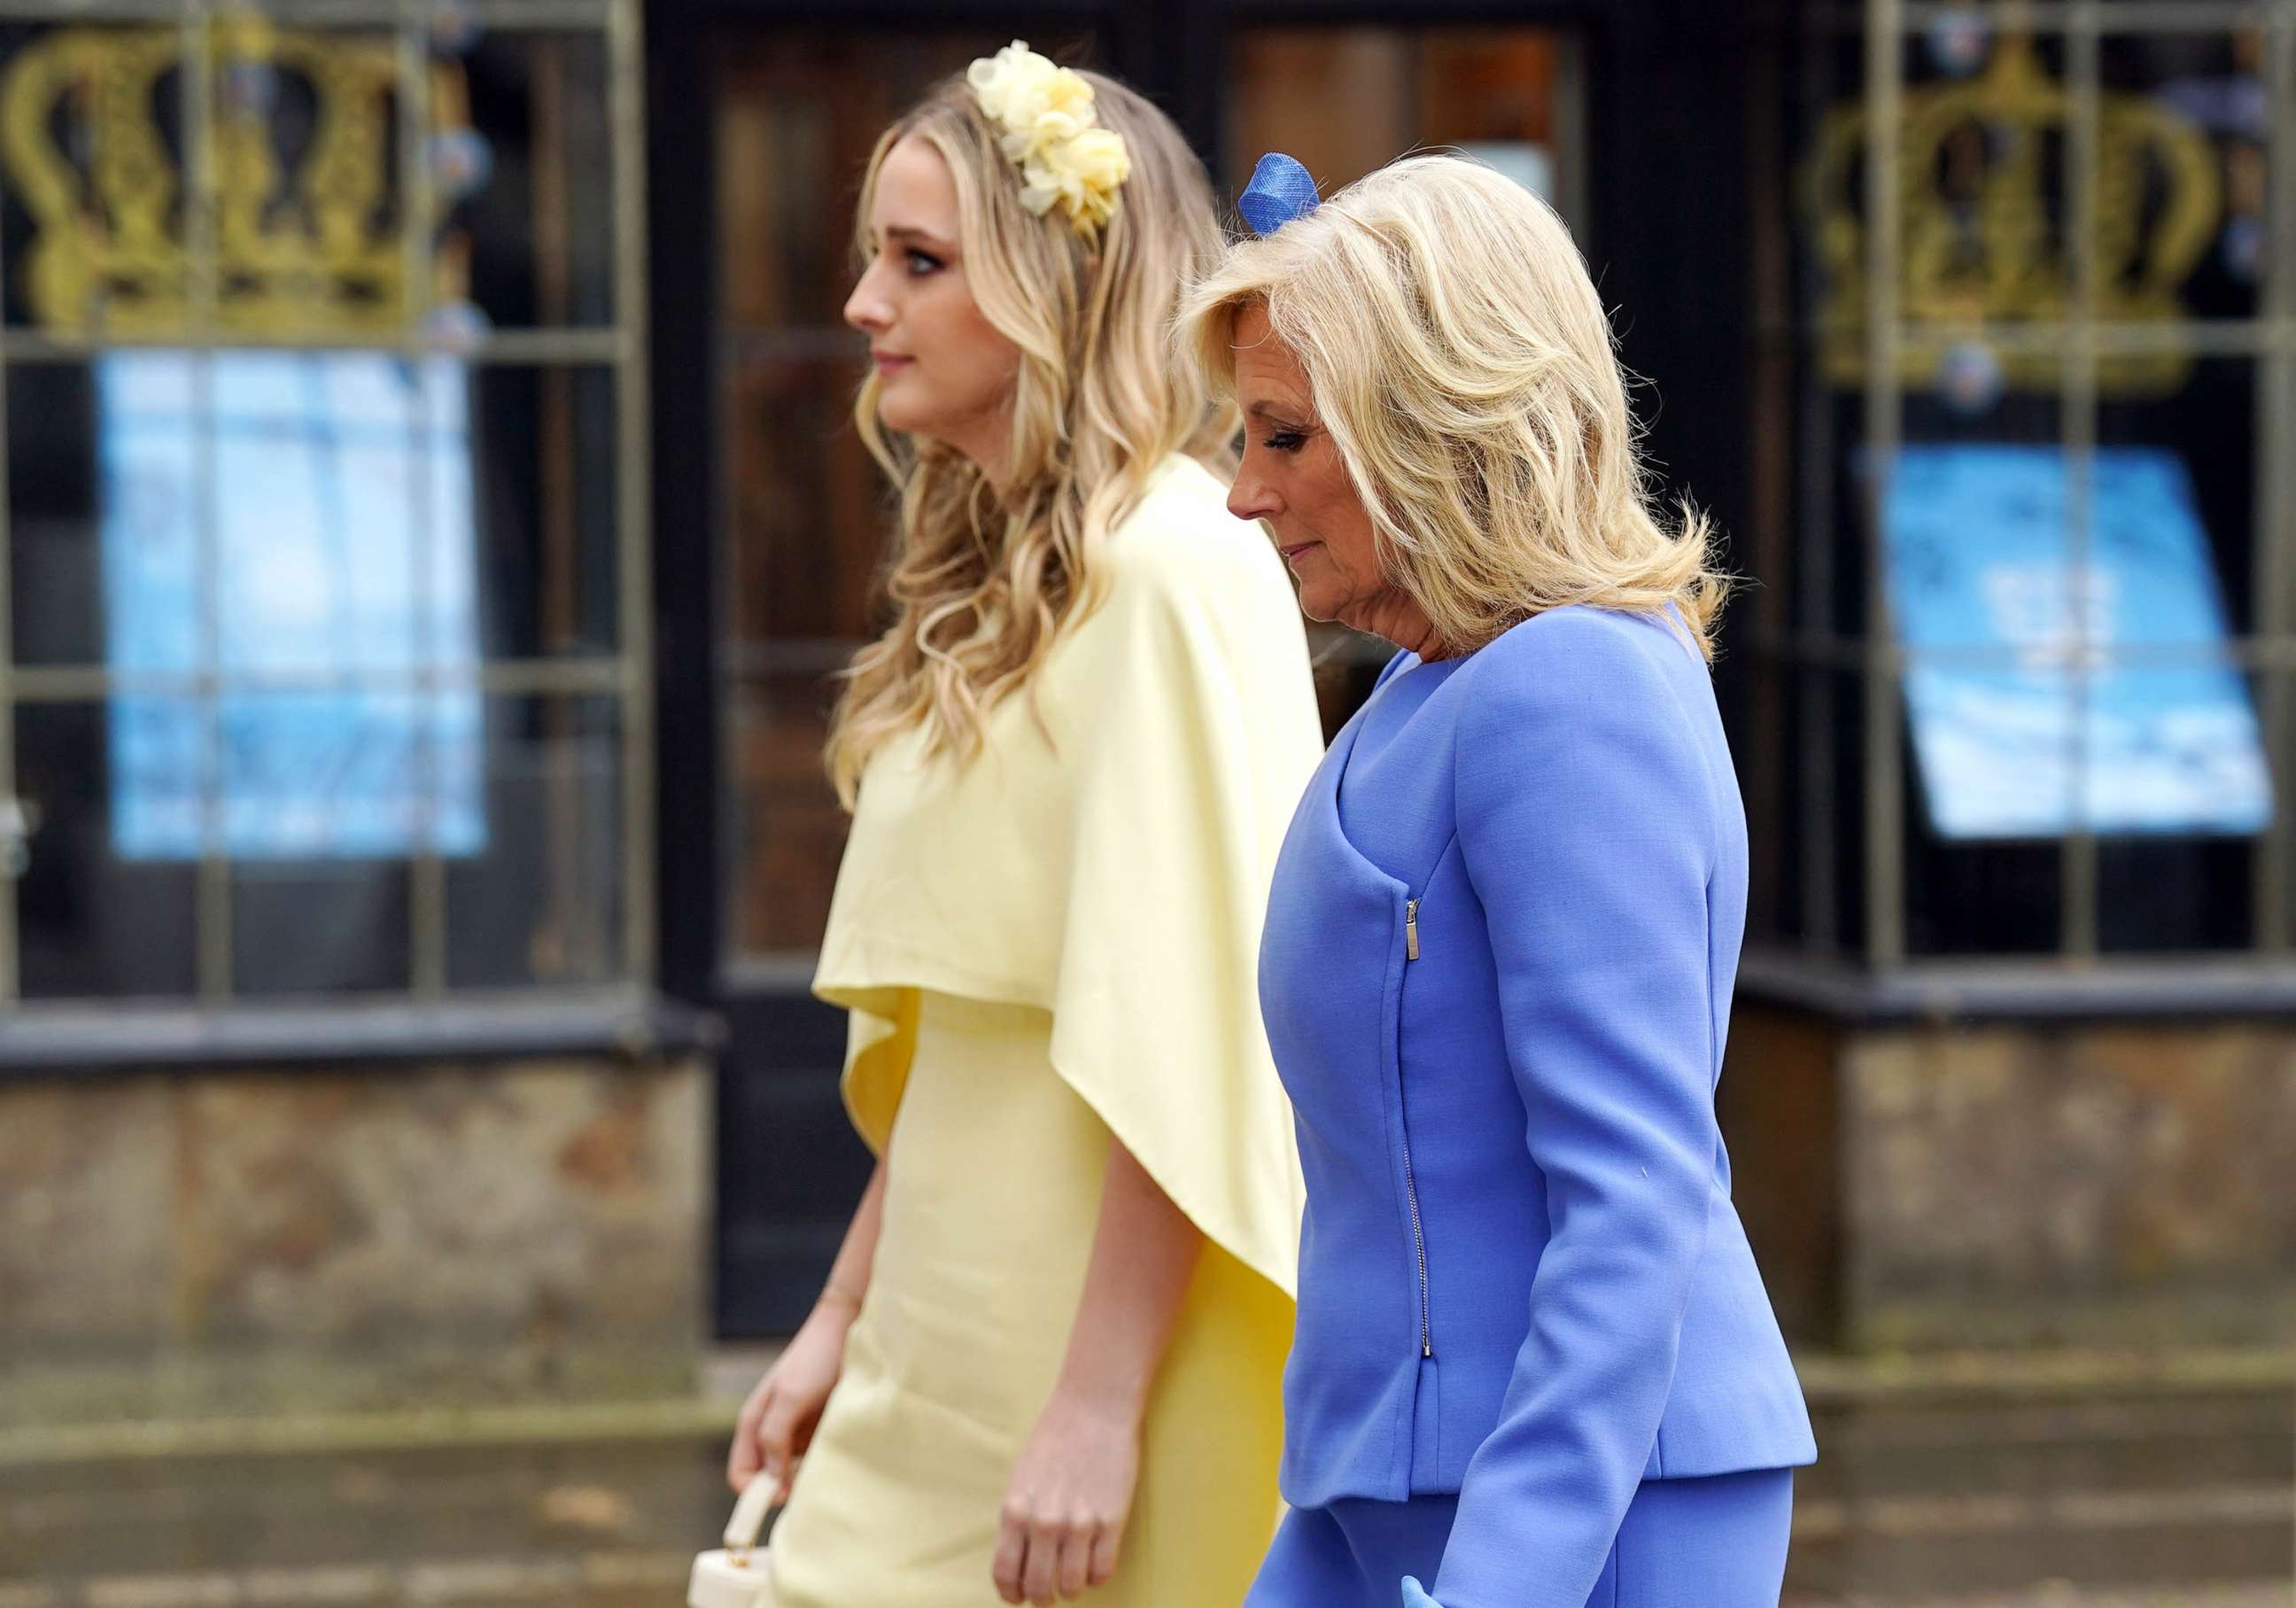 PHOTO: First lady Jill Biden and her granddaughter Finnegan Biden arrive at Westminster Abbey ahead of the Coronation of King Charles III and Queen Camilla, May 6, 2023 in London.